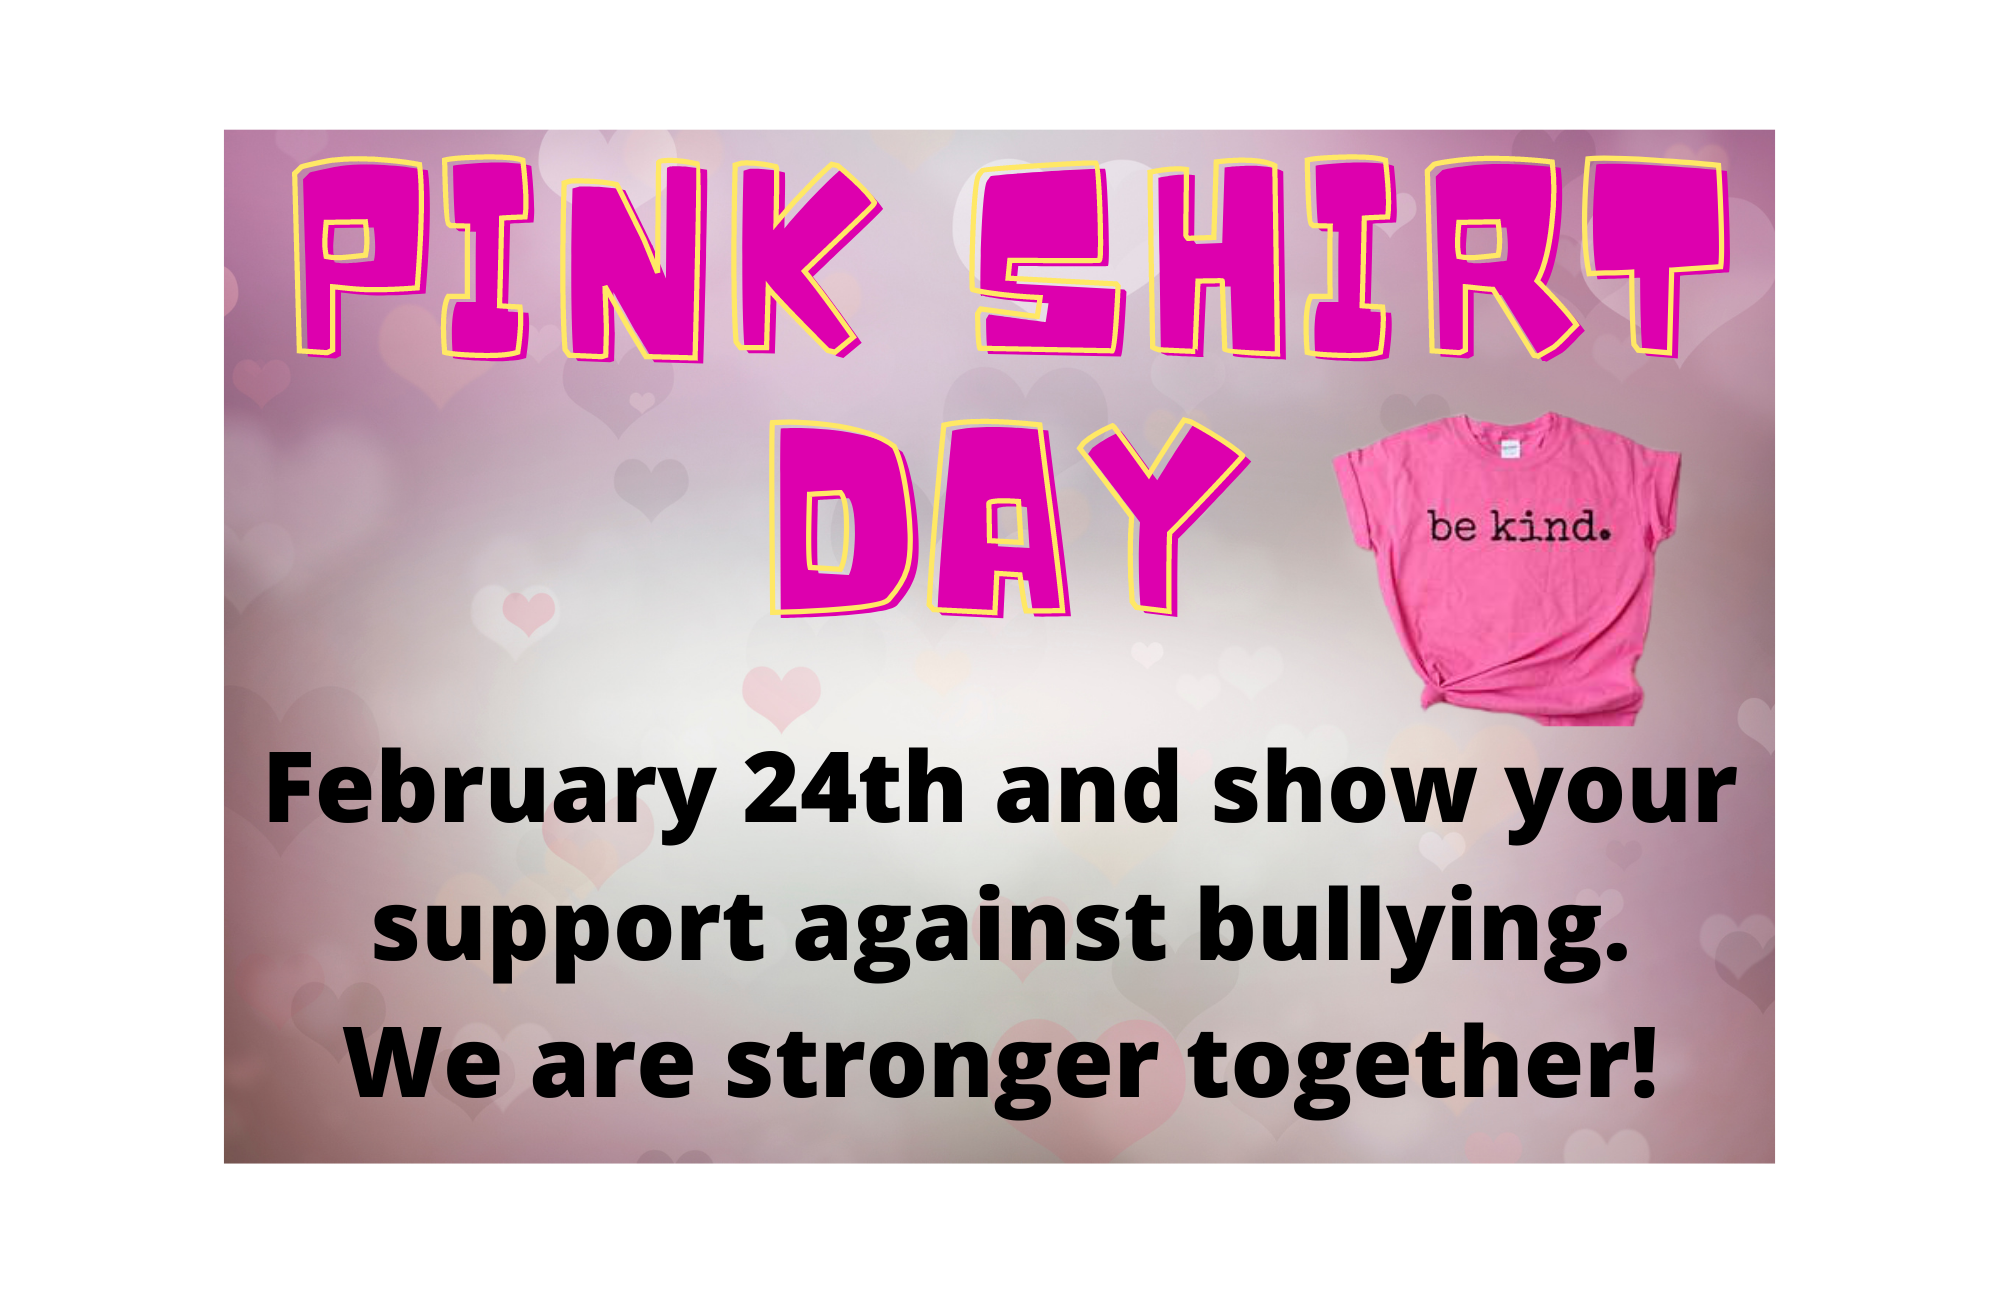 Pink Shirt Day is being held on Feb 24th. Wear pink to show you care